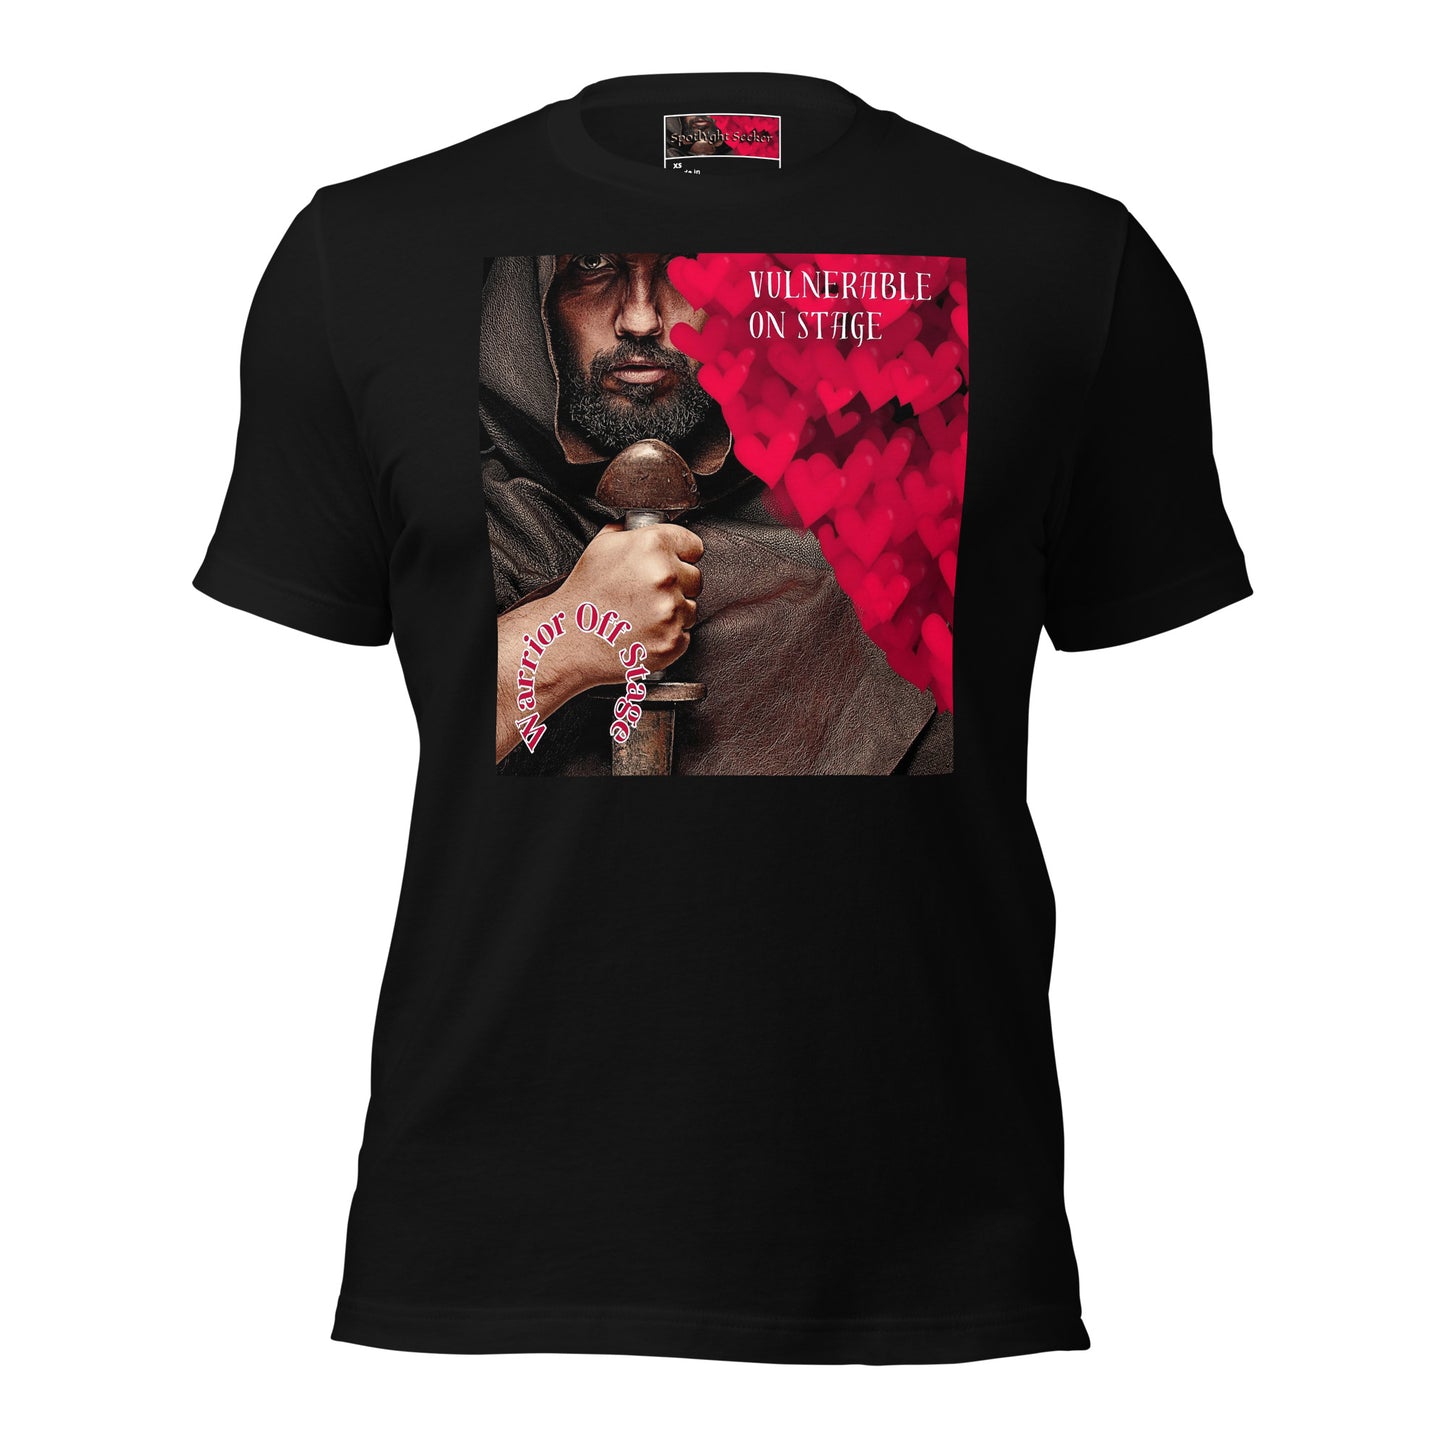 ulnerable Warrior BAM T-Shirt: Onstage, vulnerability reveals the artist's soul; offstage, transform into a warrior, guarding profound truths. Embrace the delicate dance with authenticity and resilience in this living masterpiece.